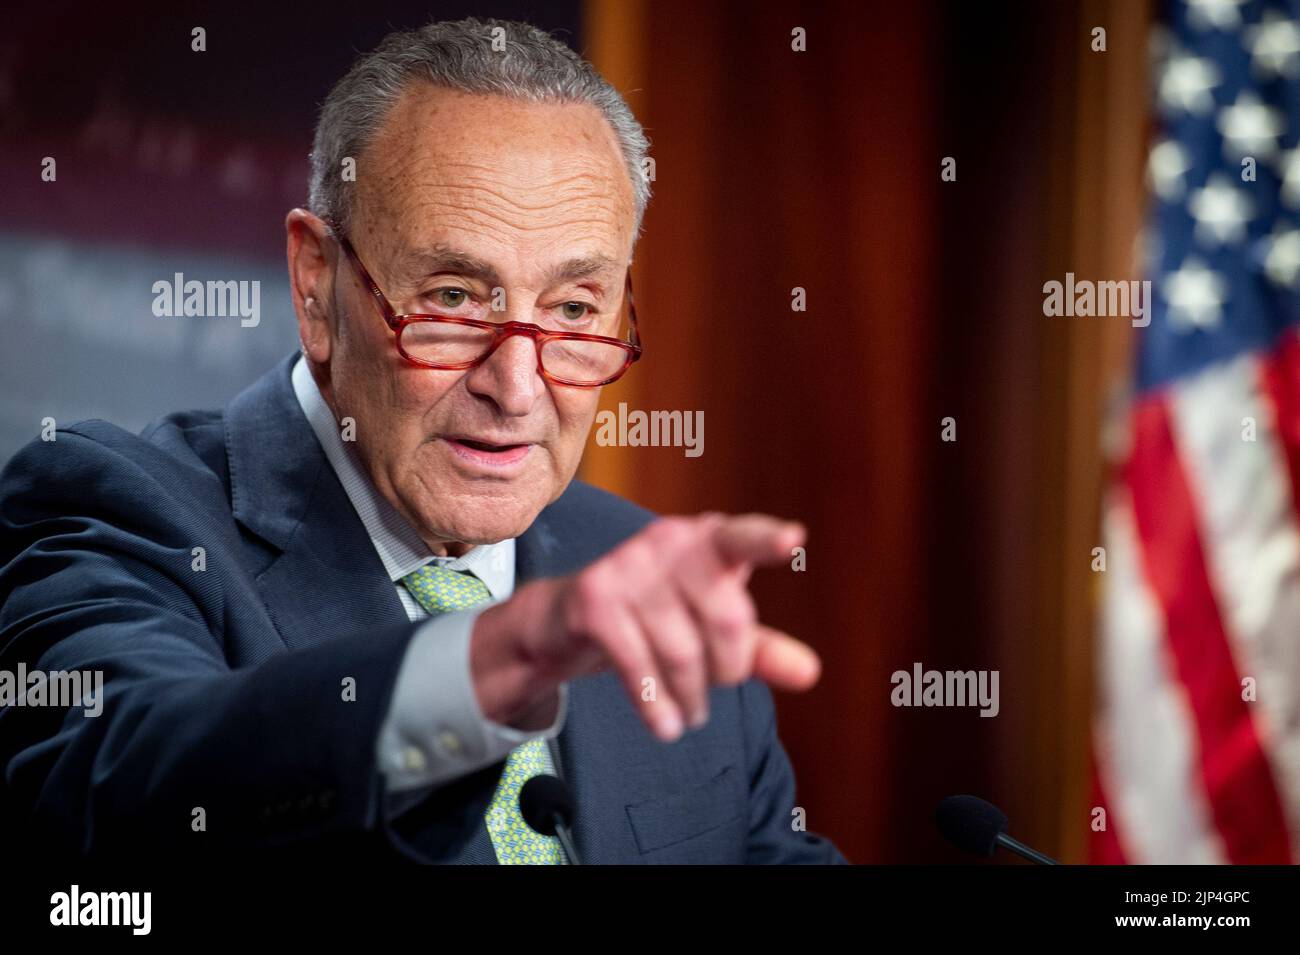 Washington, United States Of America. 28th July, 2022. United States Senate Majority Leader Chuck Schumer (Democrat of New York) responds to questions during a press conference regarding recent legislation at the US Capitol in Washington, DC, Thursday, July 28, 2022. Credit: Rod Lamkey/CNP/AdMedia/Newscom/Alamy Live News Stock Photo